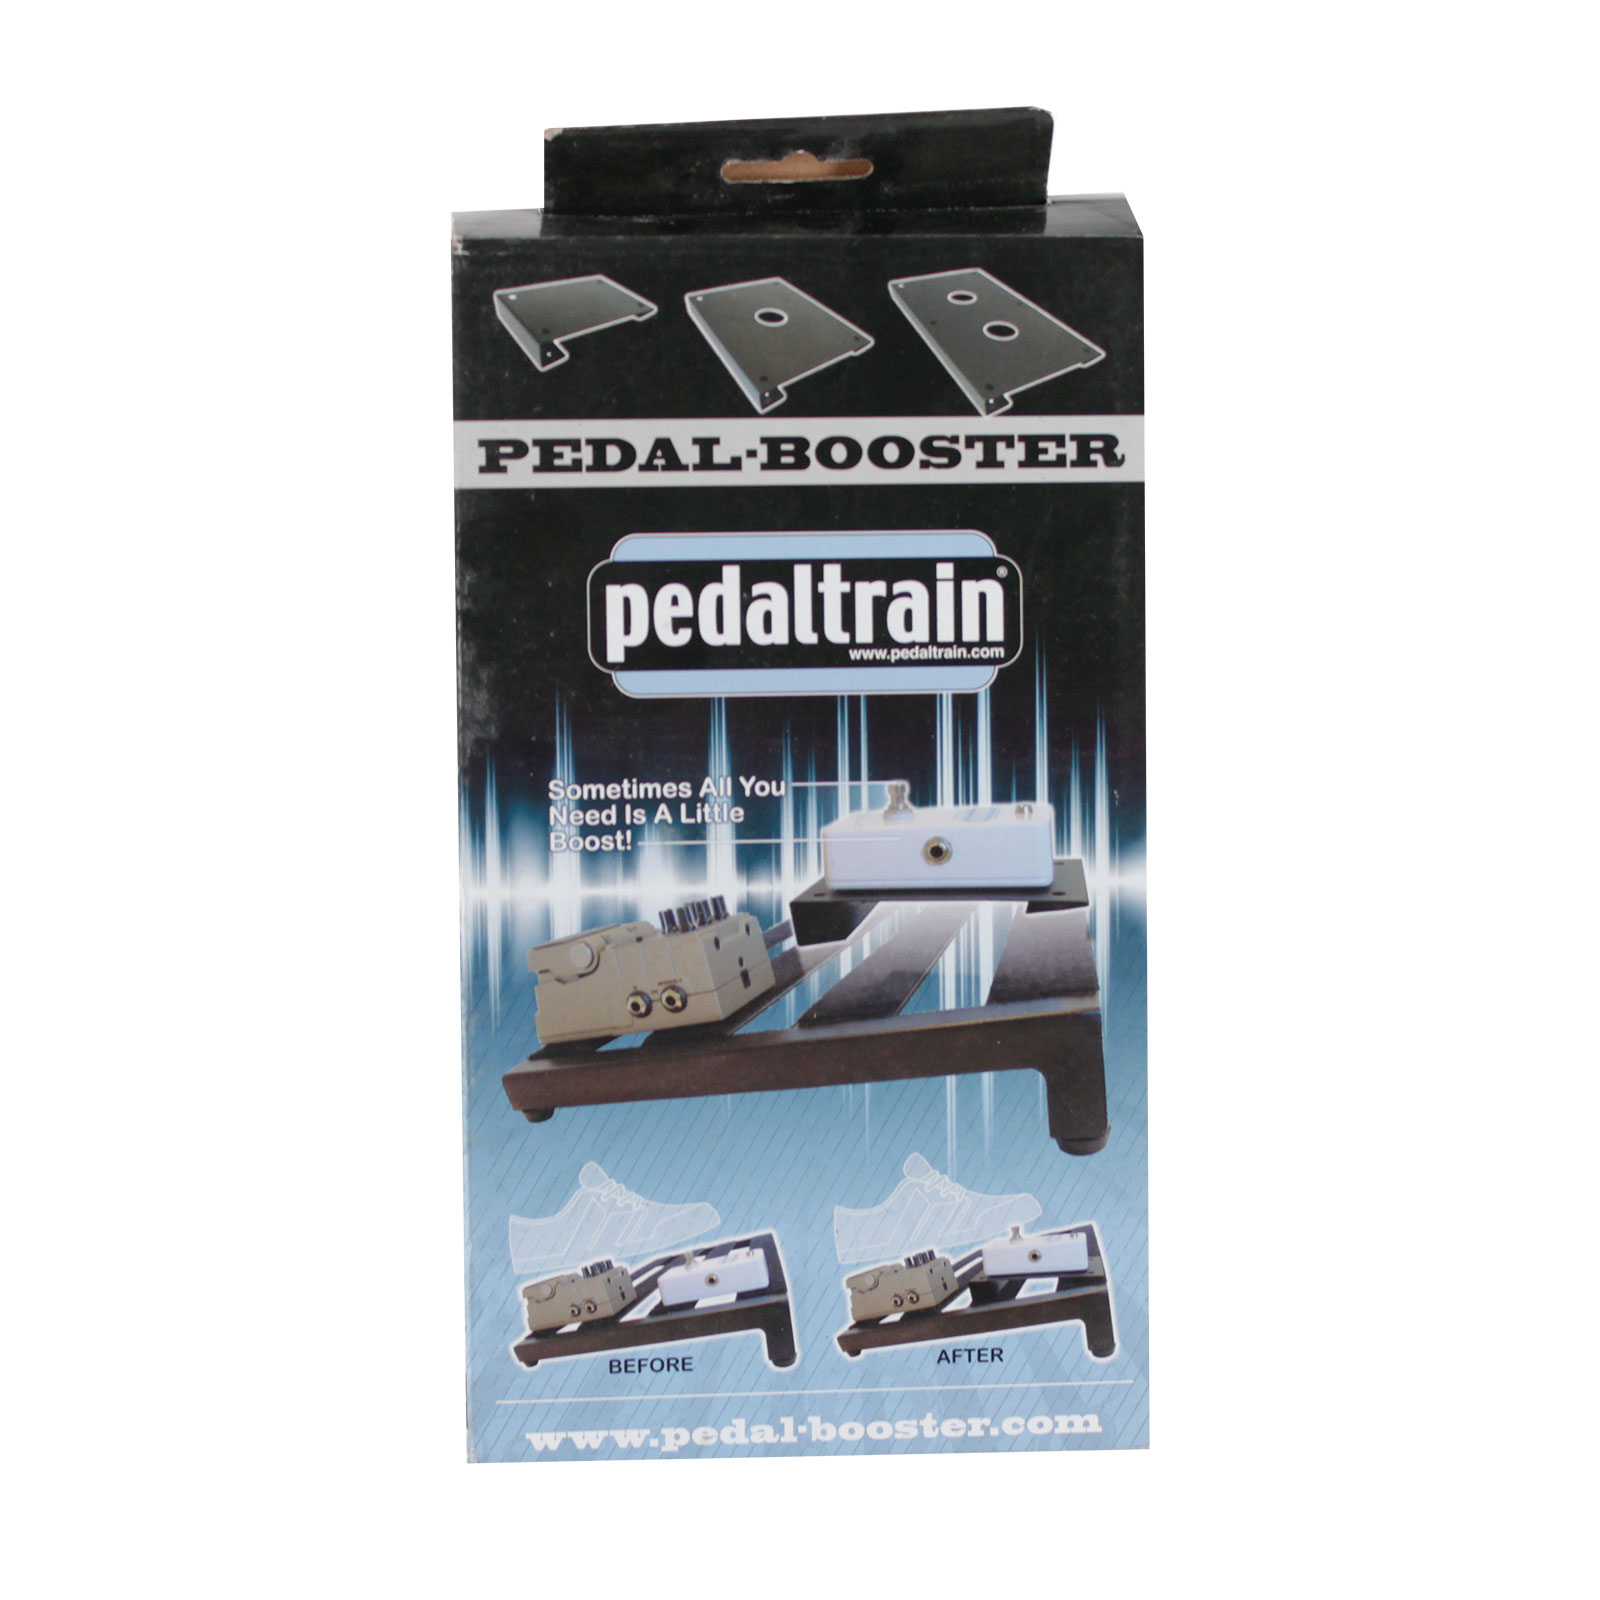 PEDALTRAIN 3-PACK PEDAL-BOOSTER KIT